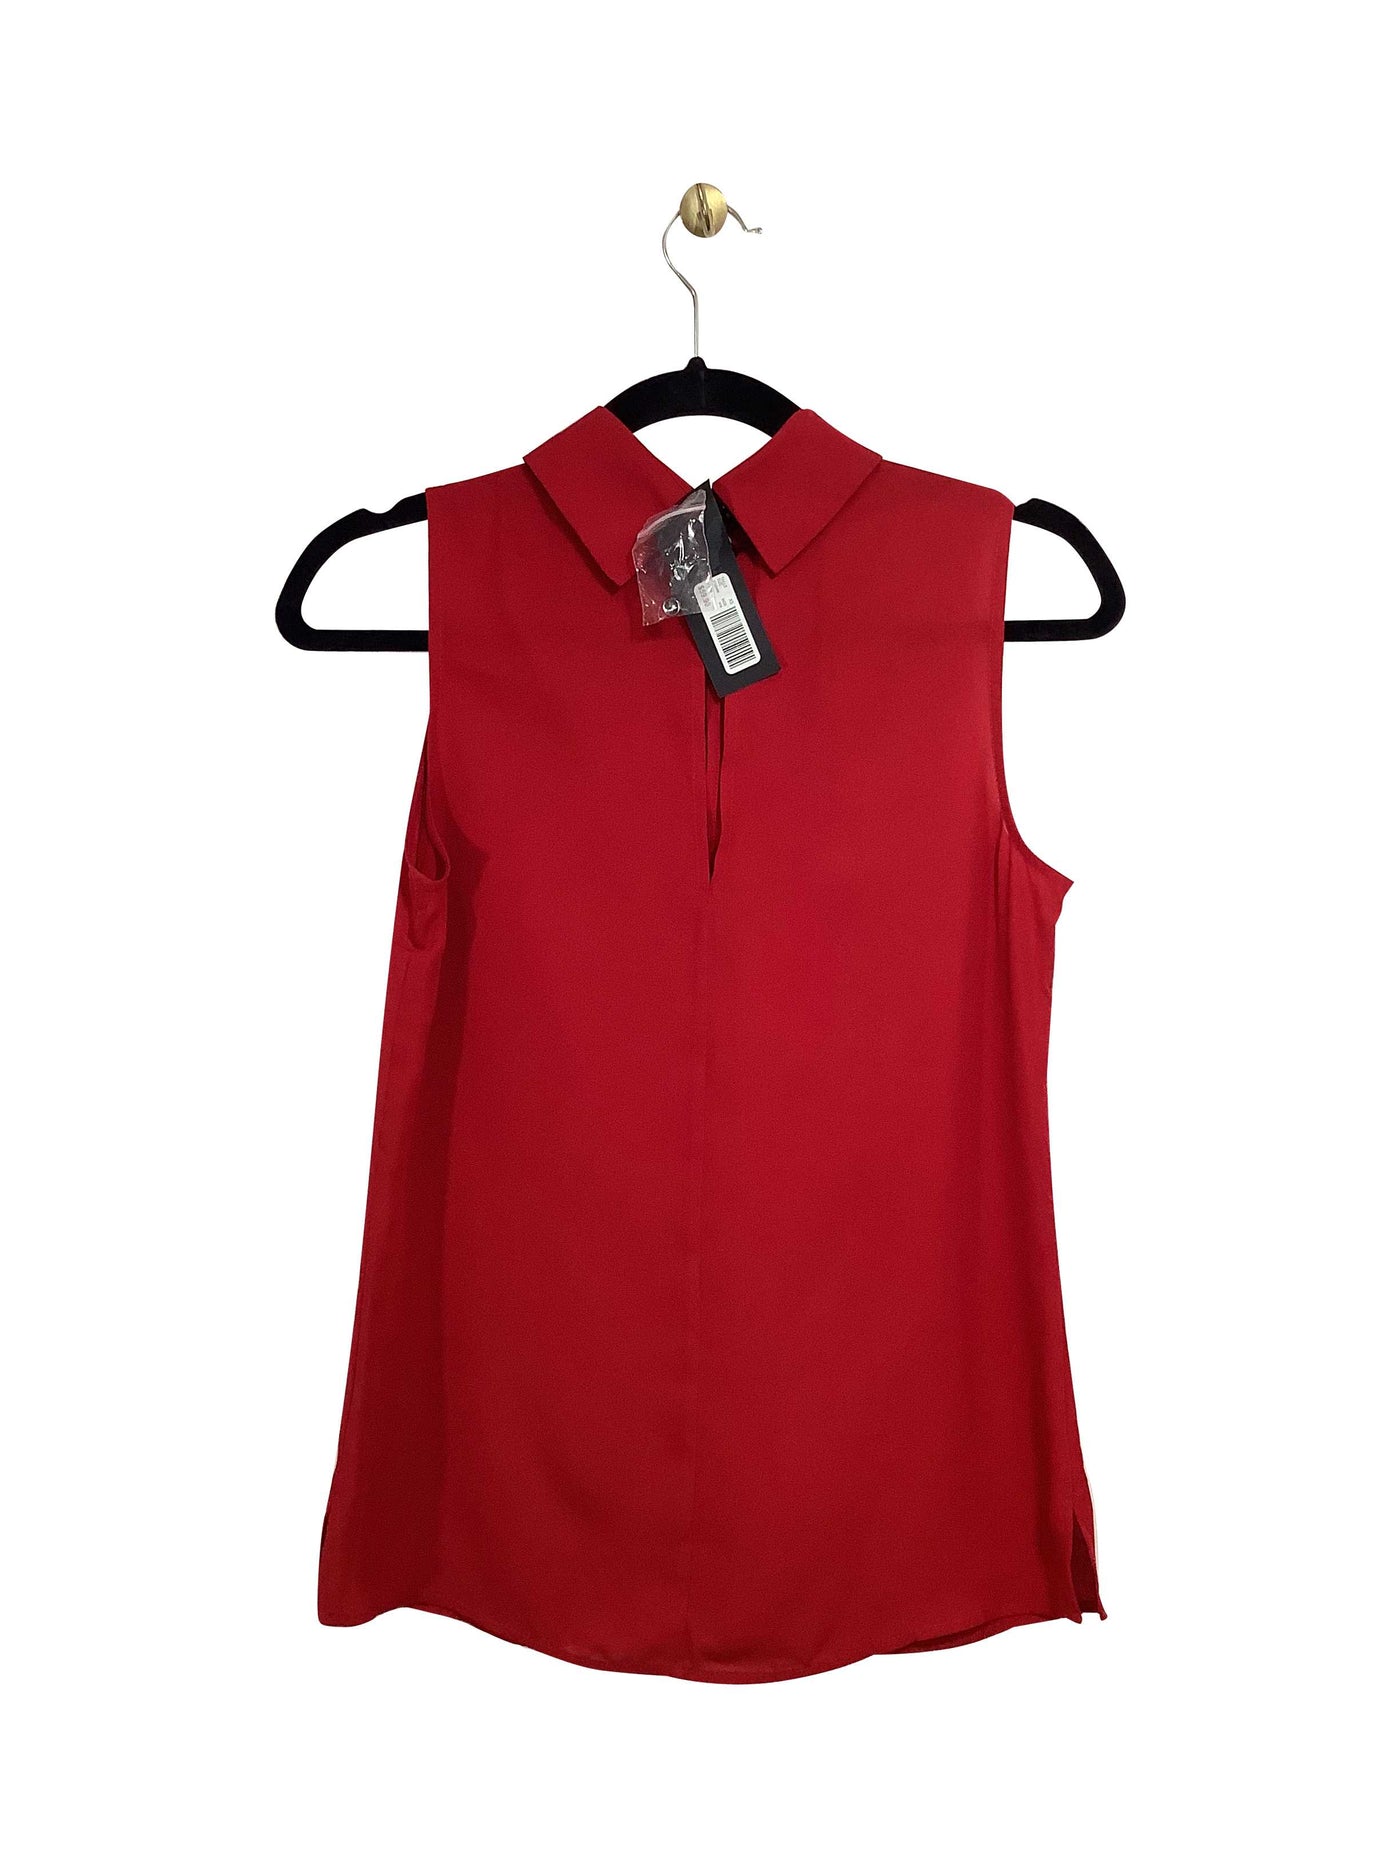 WILLOW & THREAD Regular fit Blouse in Red - Size XS | 15 $ KOOP